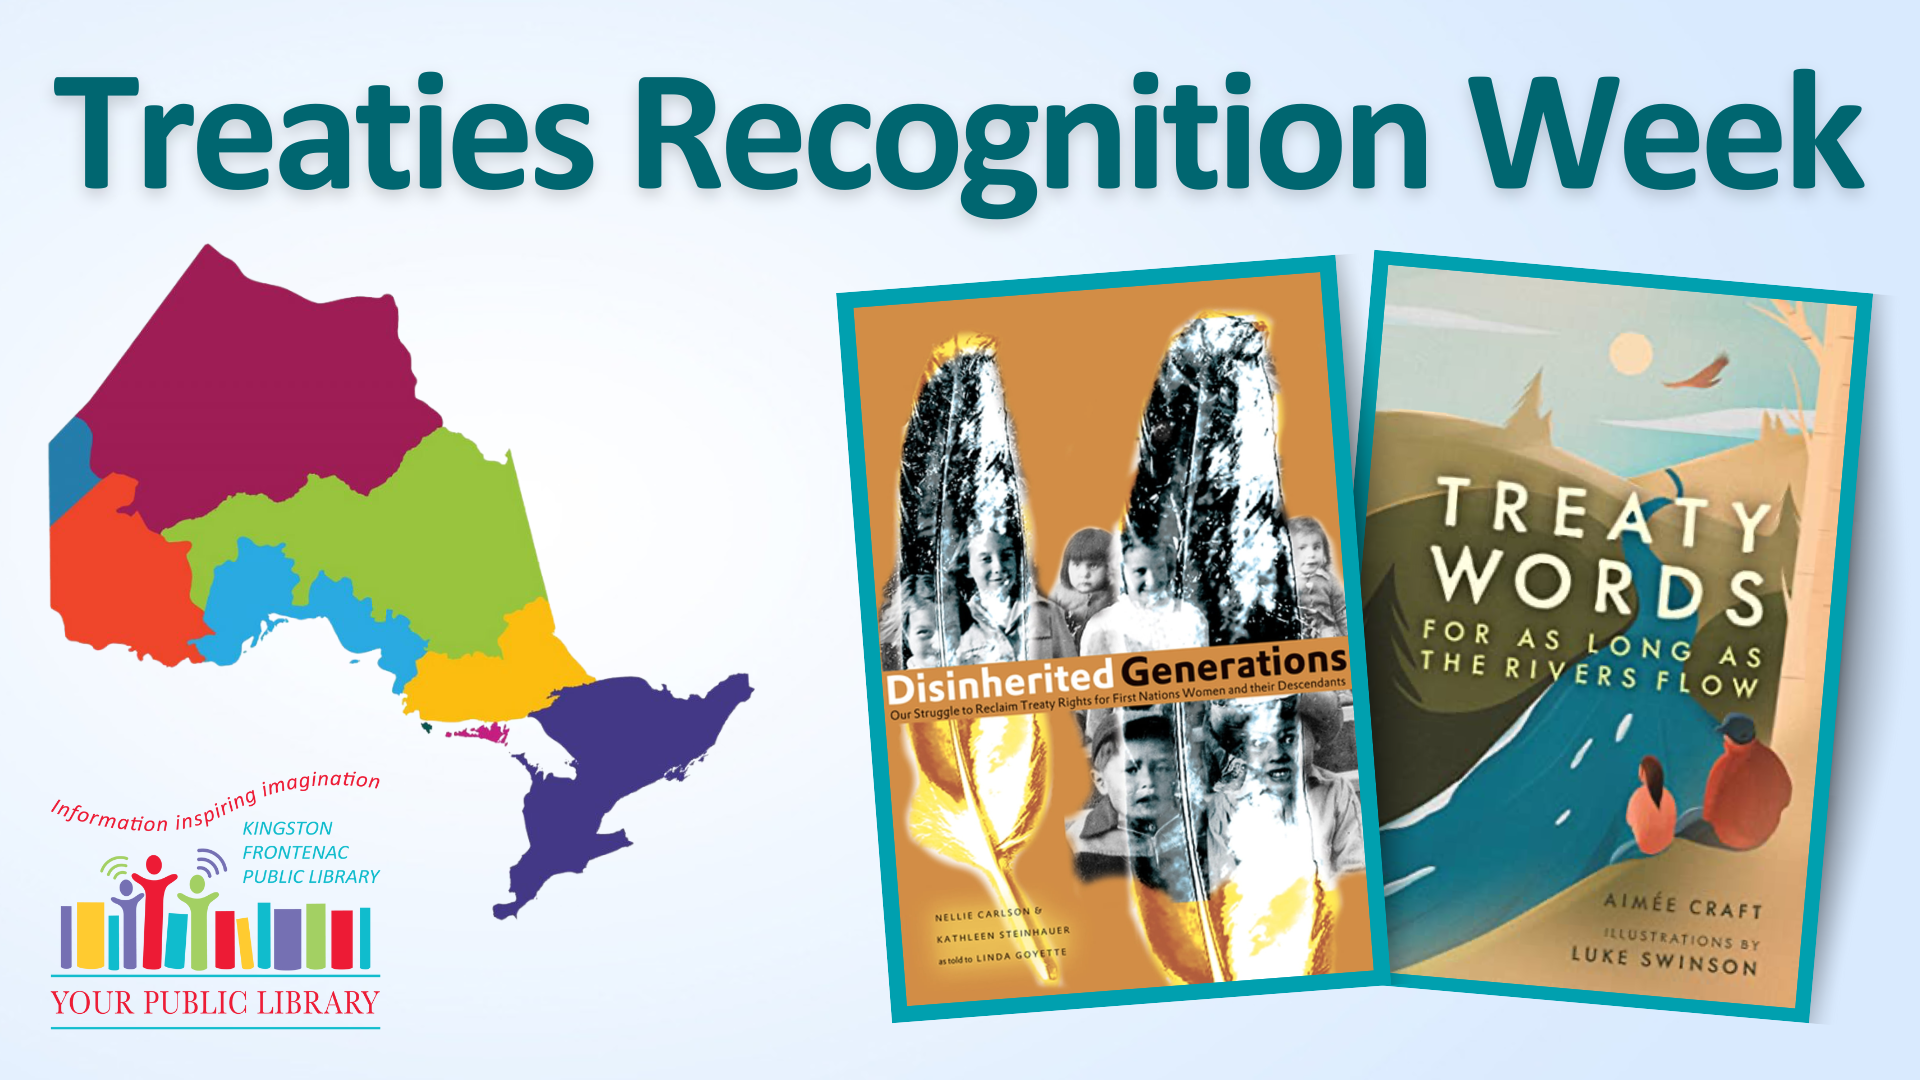 Two books - Treaty Words and Disinherited Generations - beside a Treaty Map of Ontario. Text reads Treaties Recognition Week.